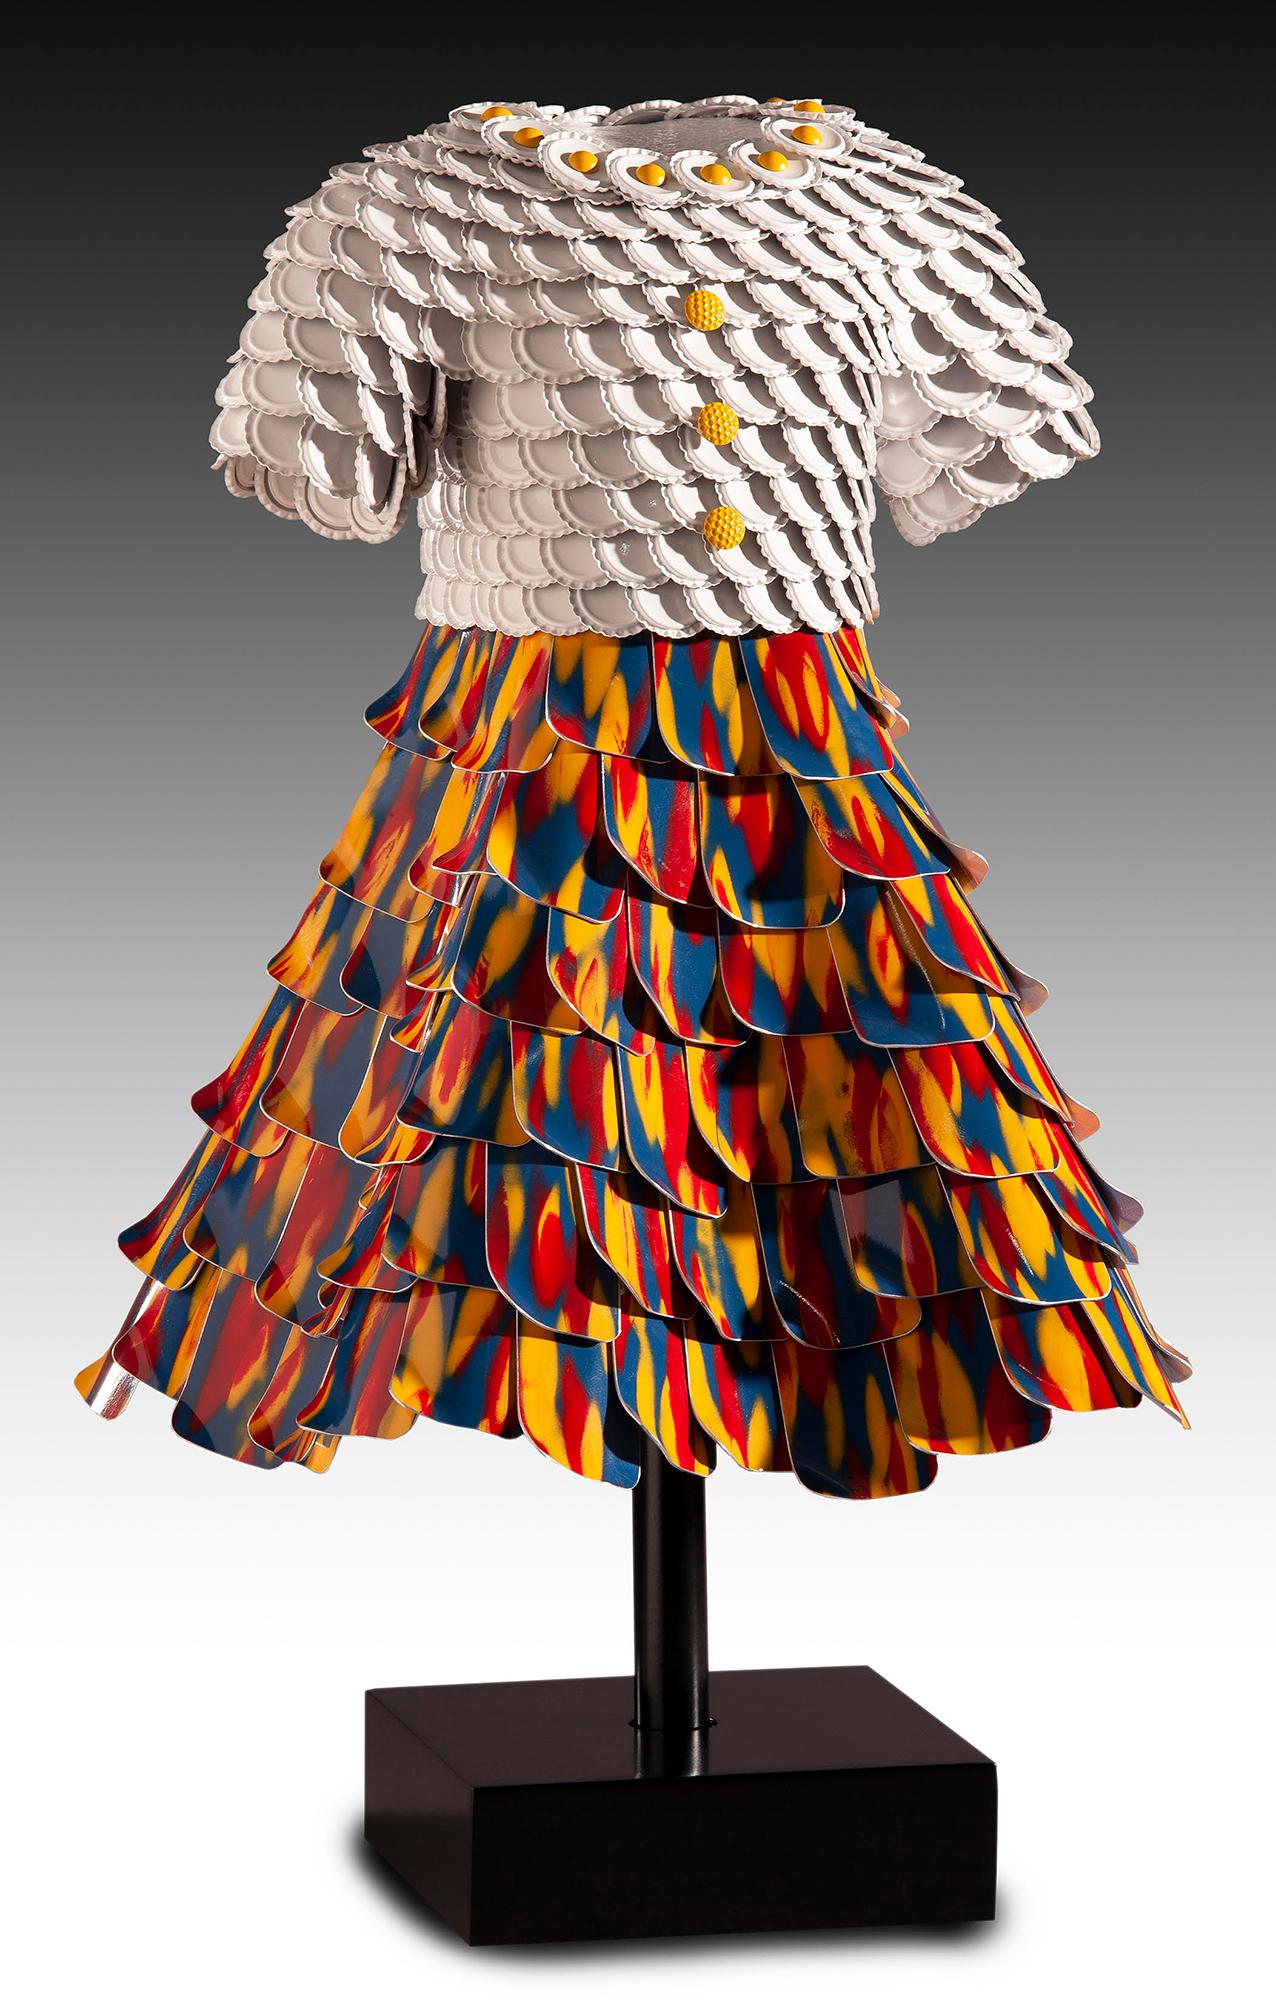 'Leah' Mixed Media, Found Object Sculpture of a Red, Blue & Orange Dress